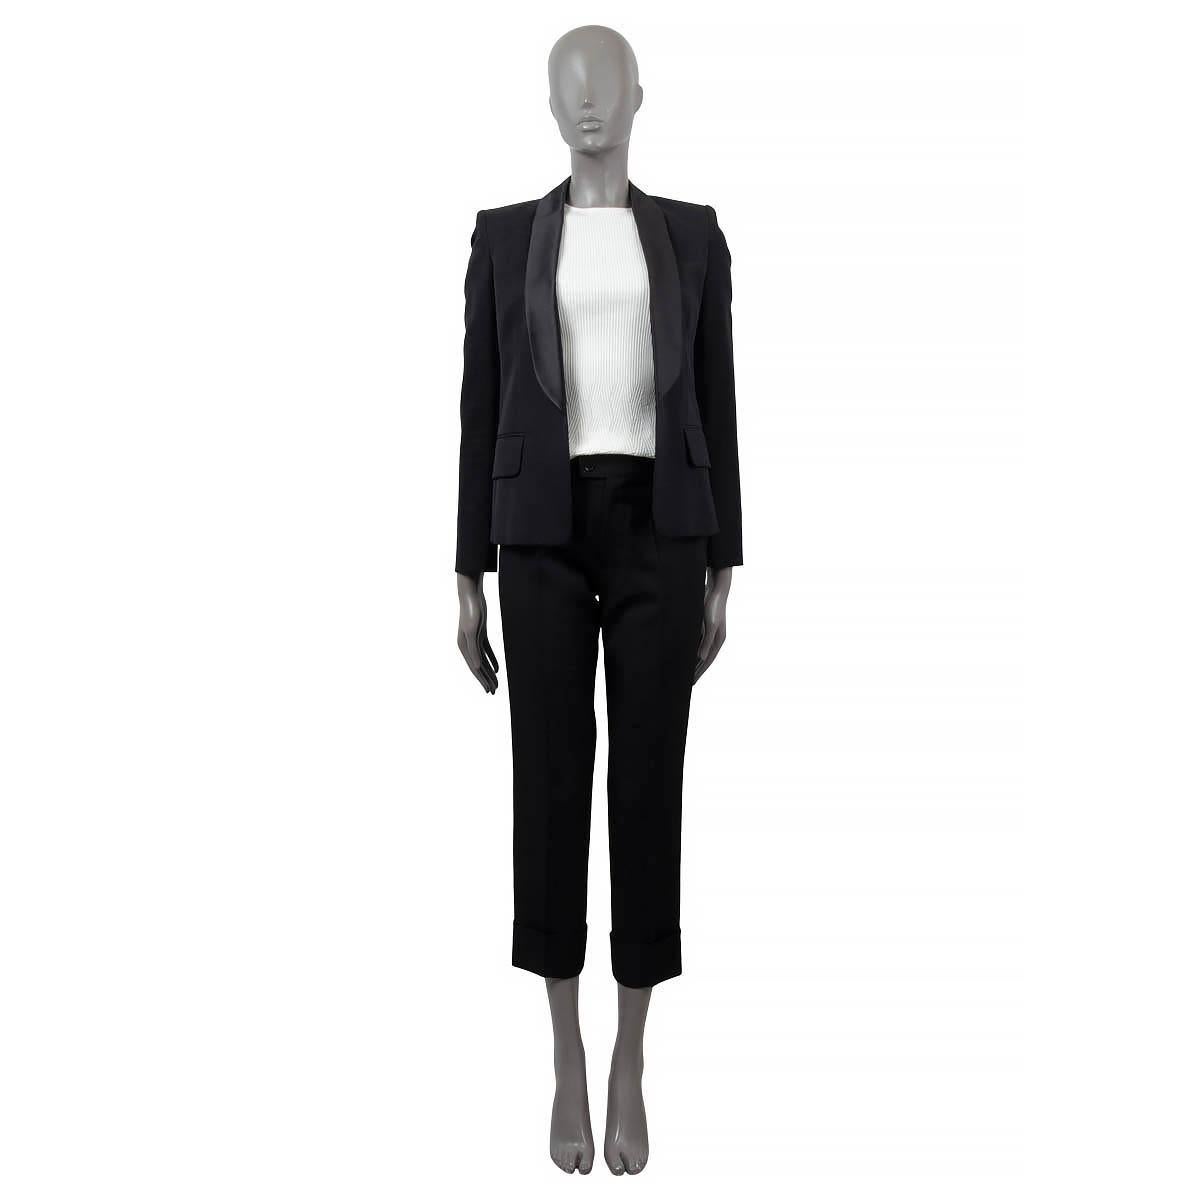 100% authentic Balmain open blazer in black wool (100%). Features a satin lapel and two flap pockets (one sewn shut) on the front. Lined in black viscose (52%) and cotton (48%). Has been worn with some light wear along the neck. Overall in excellent